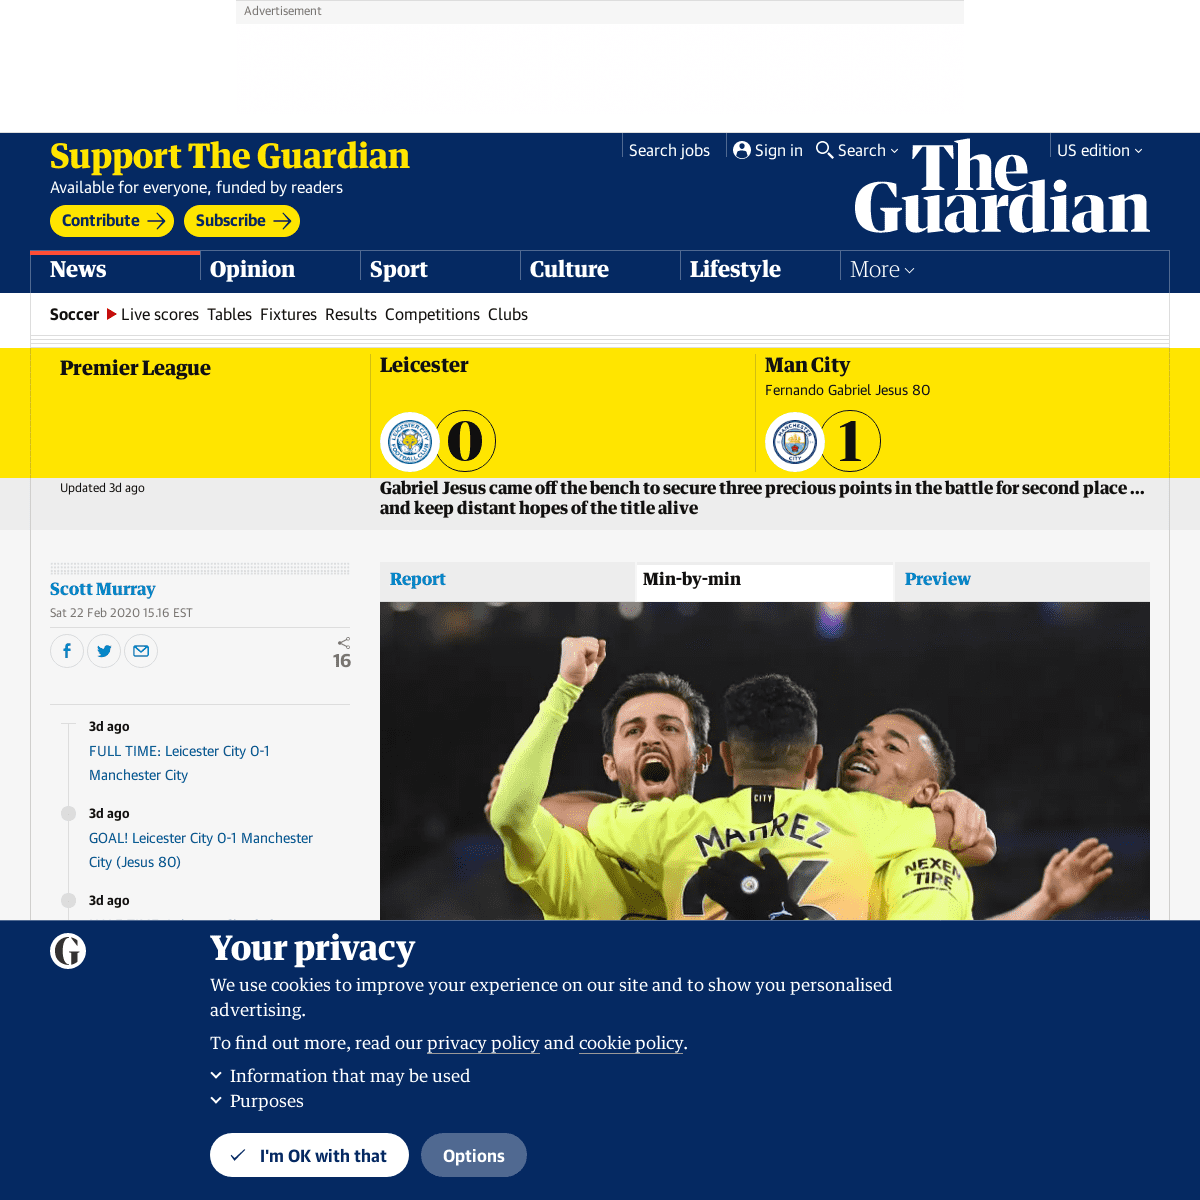 A complete backup of www.theguardian.com/football/live/2020/feb/22/leicester-v-manchester-city-premier-league-live